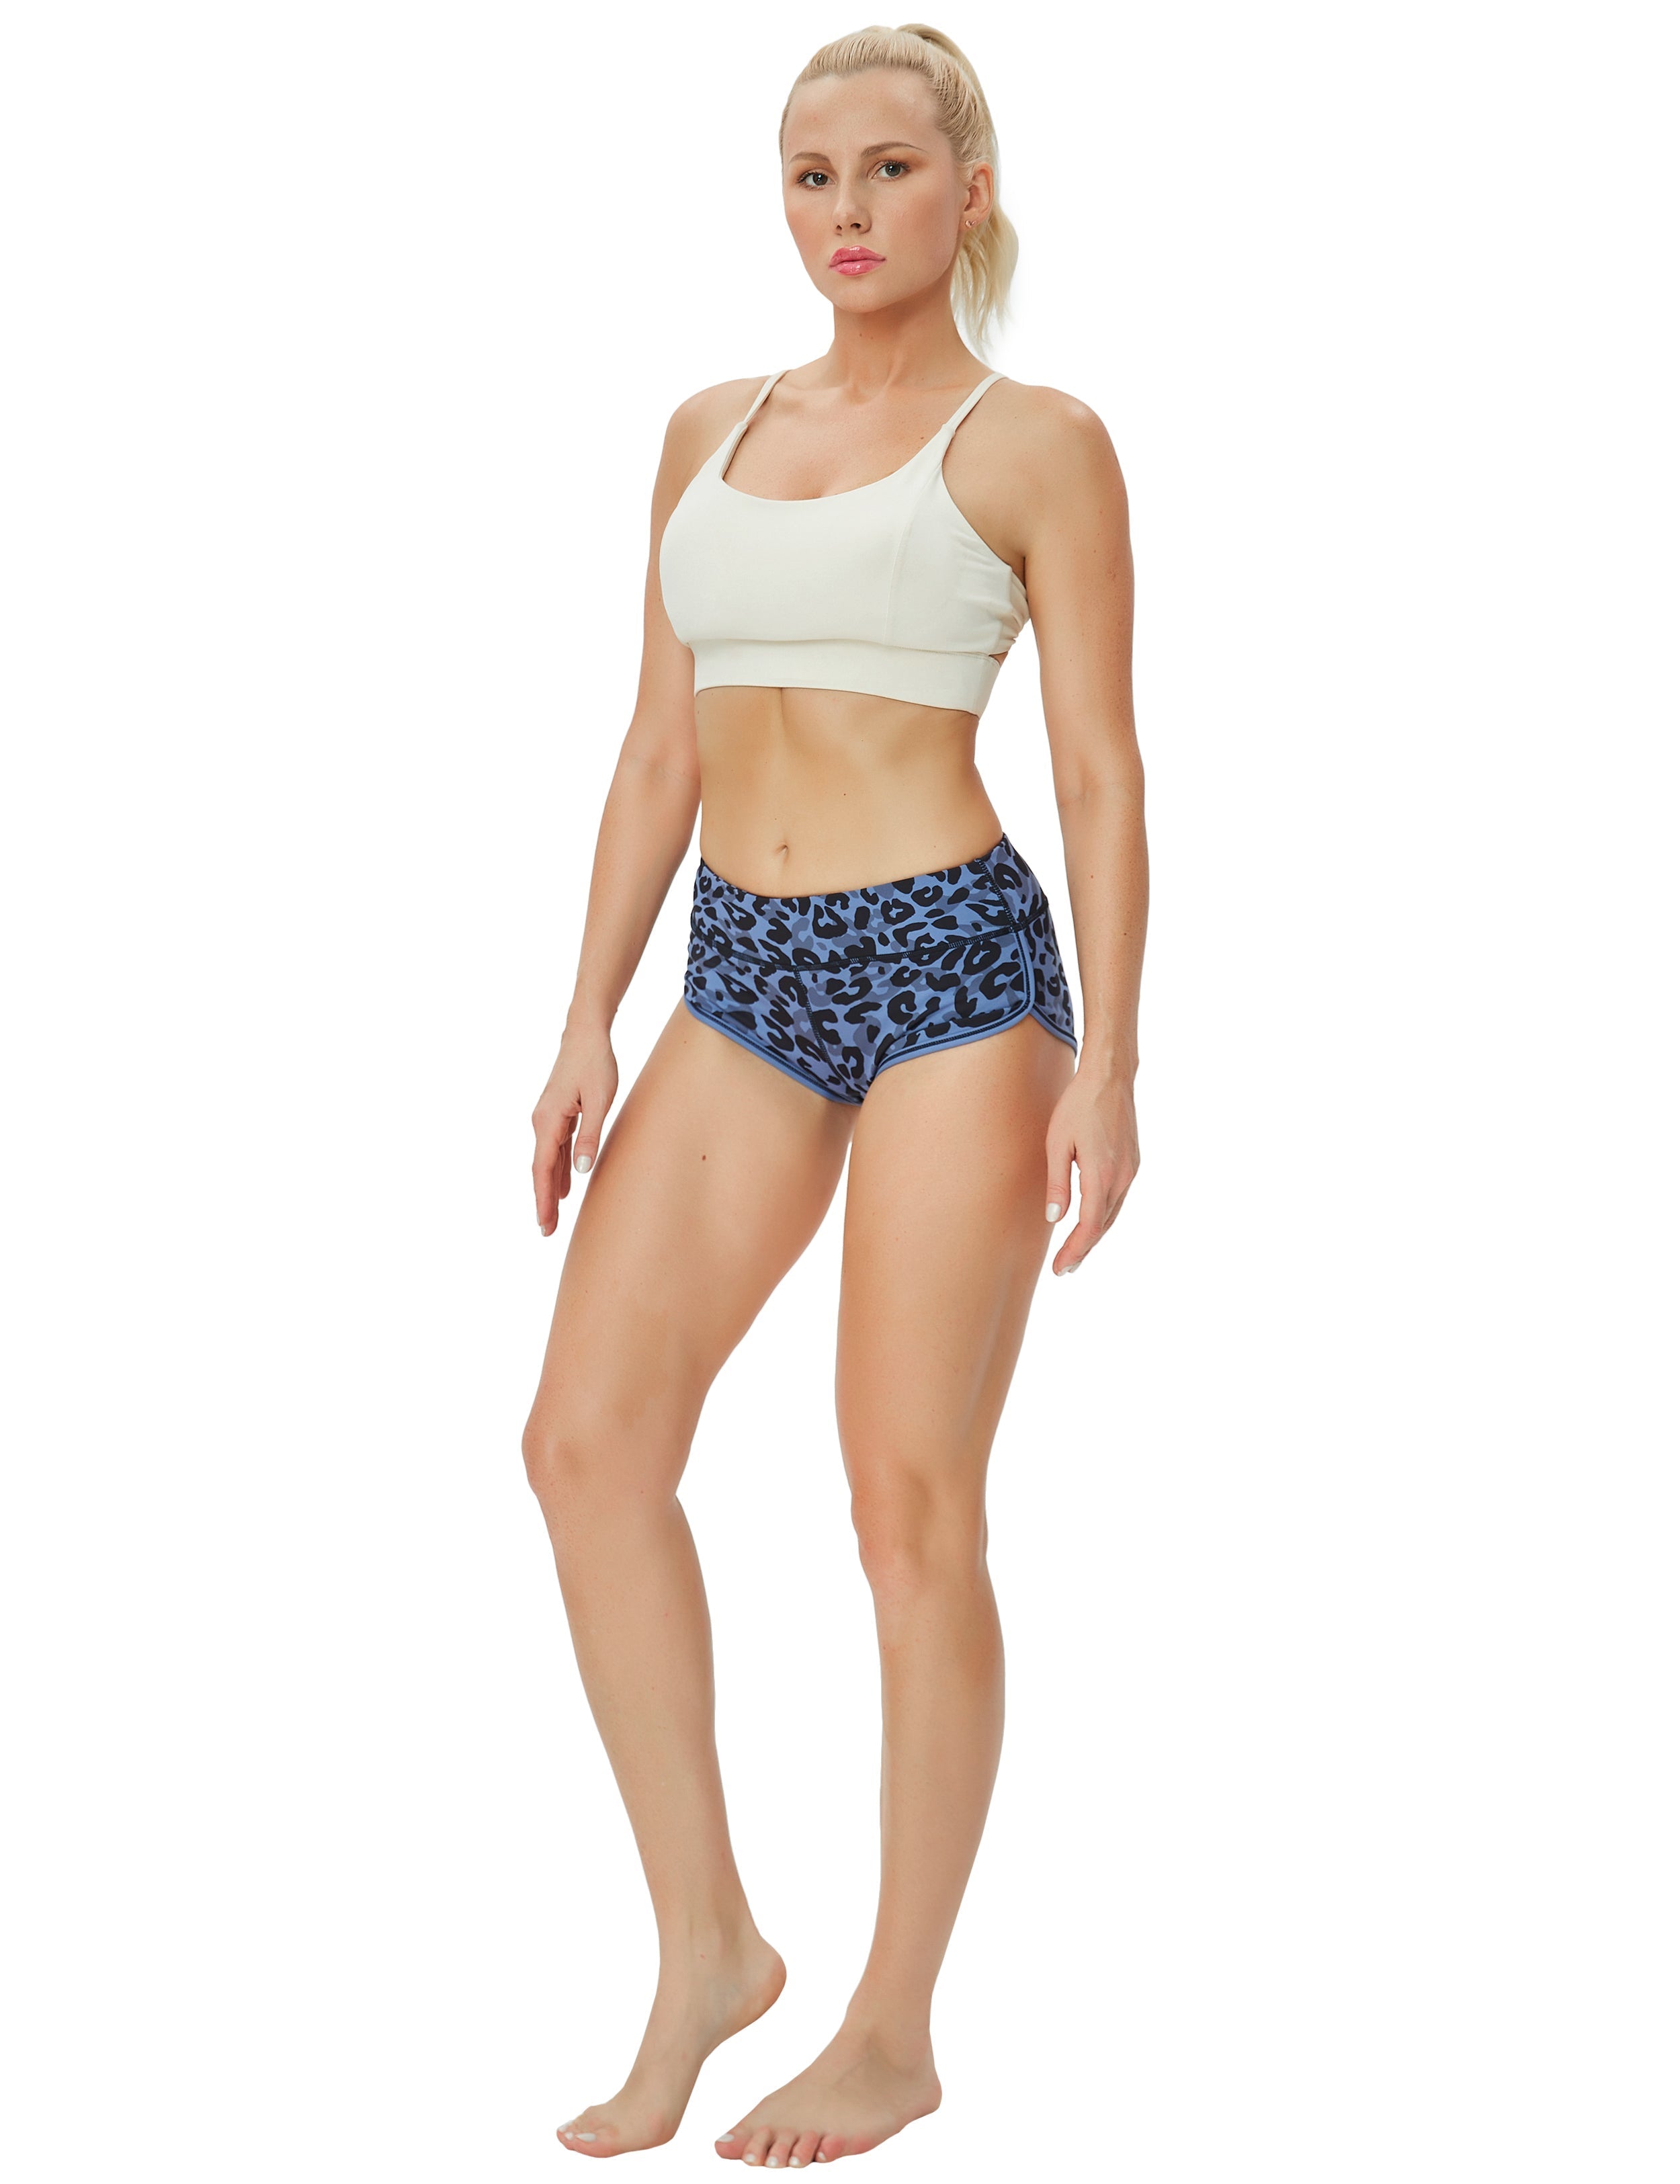 Printed Booty Gym Shorts navy_leopard Sleek, soft, smooth and totally comfortable: our newest sexy style is here. Softest-ever fabric High elasticity High density 4-way stretch Fabric doesn't attract lint easily No see-through Moisture-wicking Machine wash 78% Polyester, 22% Spandex